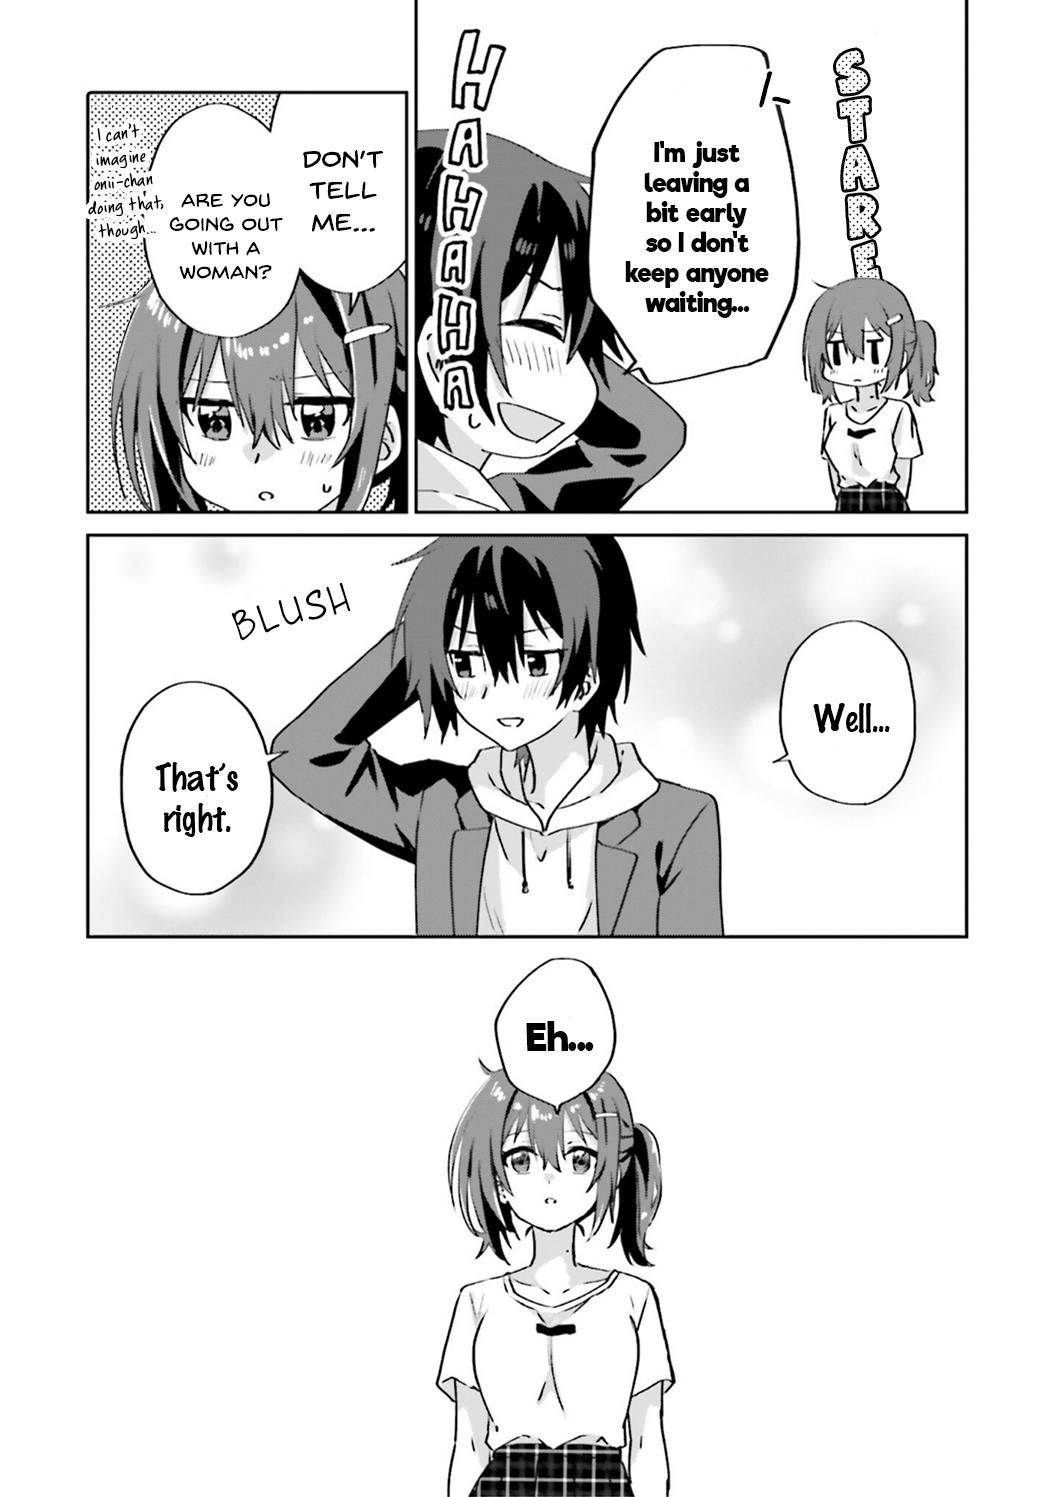 Since I’Ve Entered The World Of Romantic Comedy Manga, I’Ll Do My Best To Make The Losing Heroine Happy - Page 3